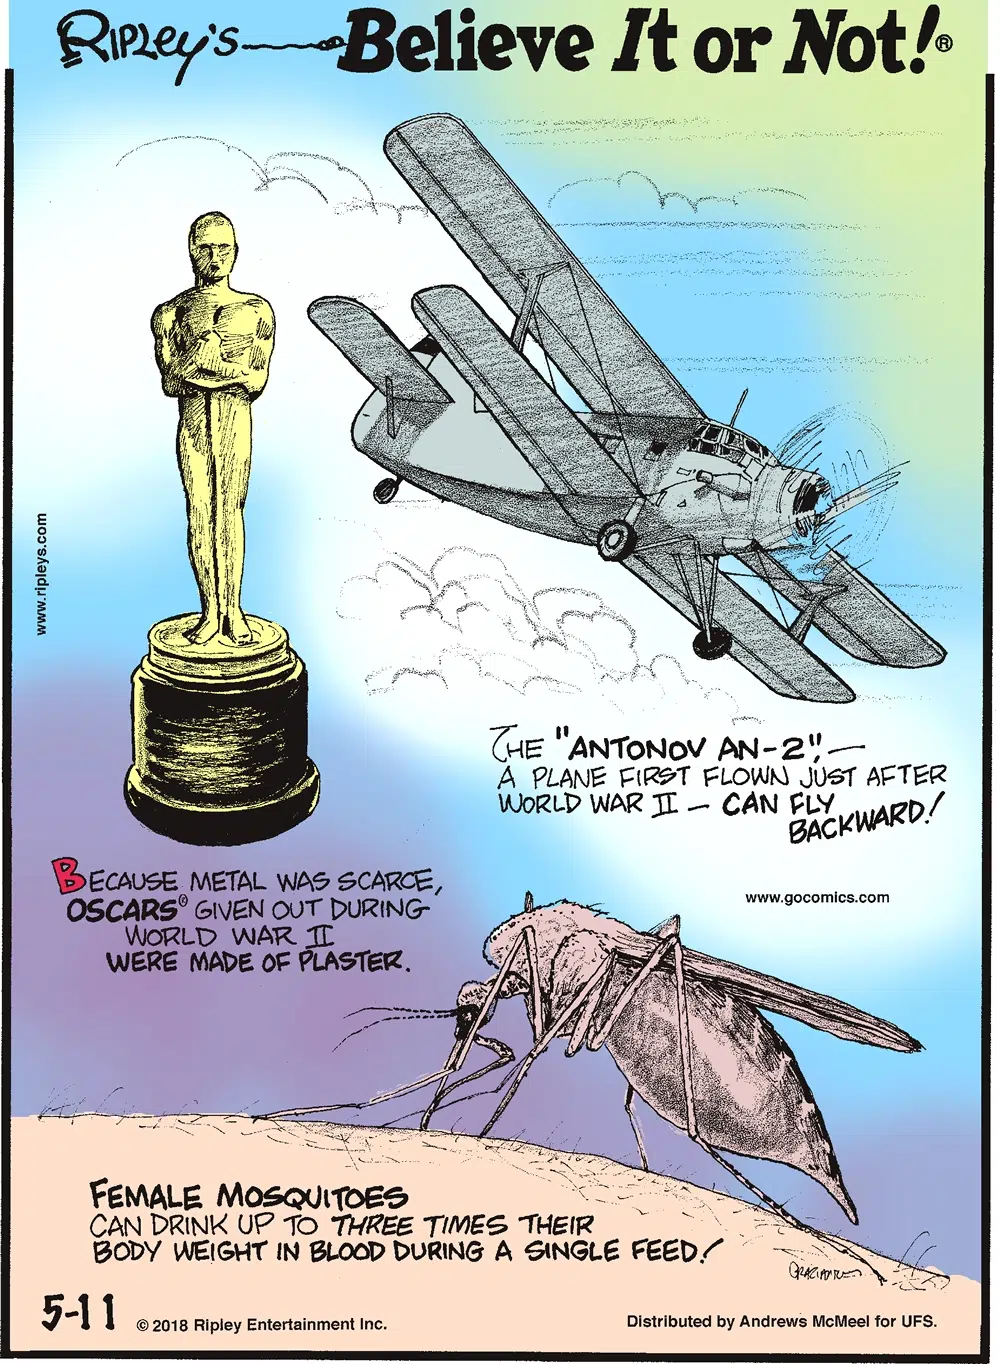 Because metal was scarce, Oscars given out during World War II were made of plaster.-------------------- The "Antono AN-2." - a plane first flown just after World War II - can fly backward!-------------------- Female mosquitoes can drink up to three times their body weight in blood during a single feed!